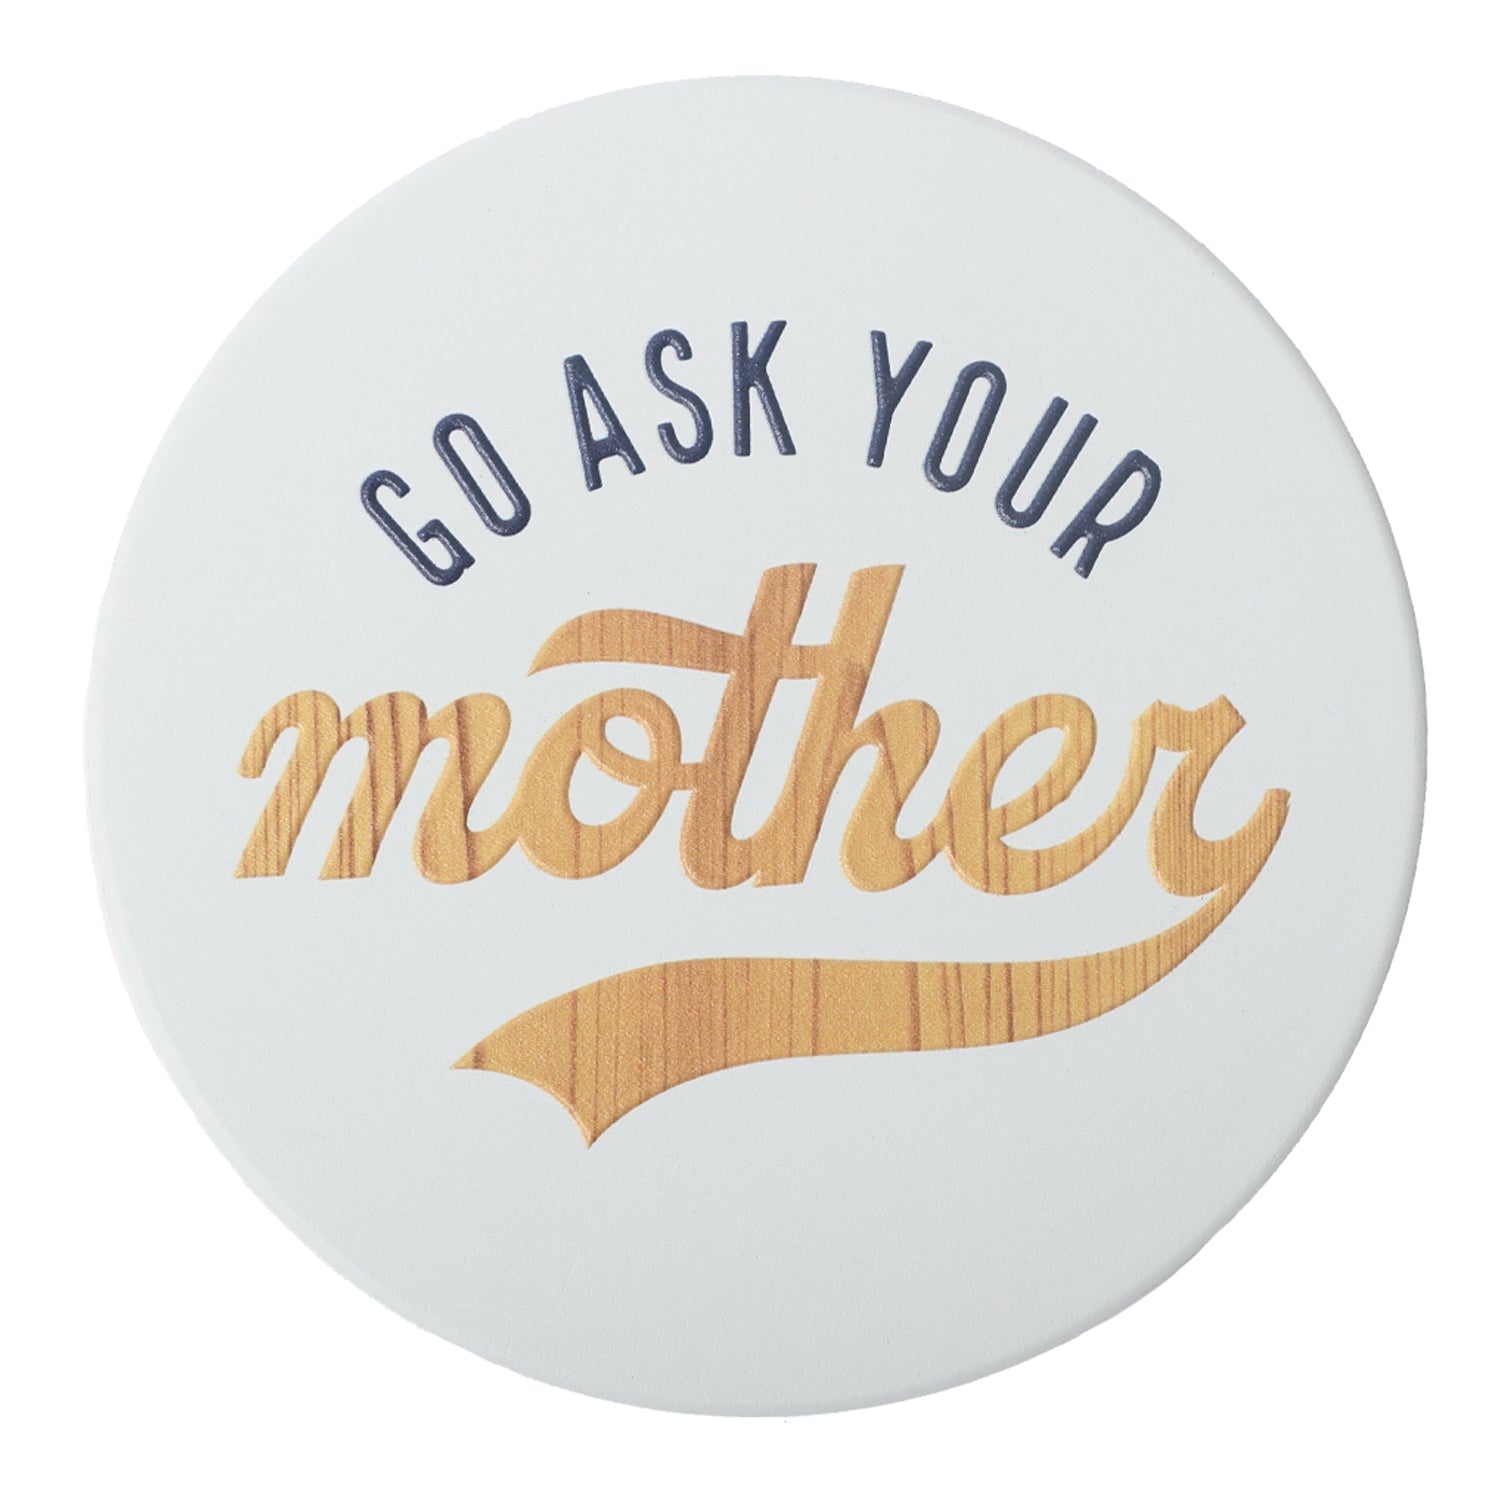 Go Ask Your Mother Ceramic Coaster